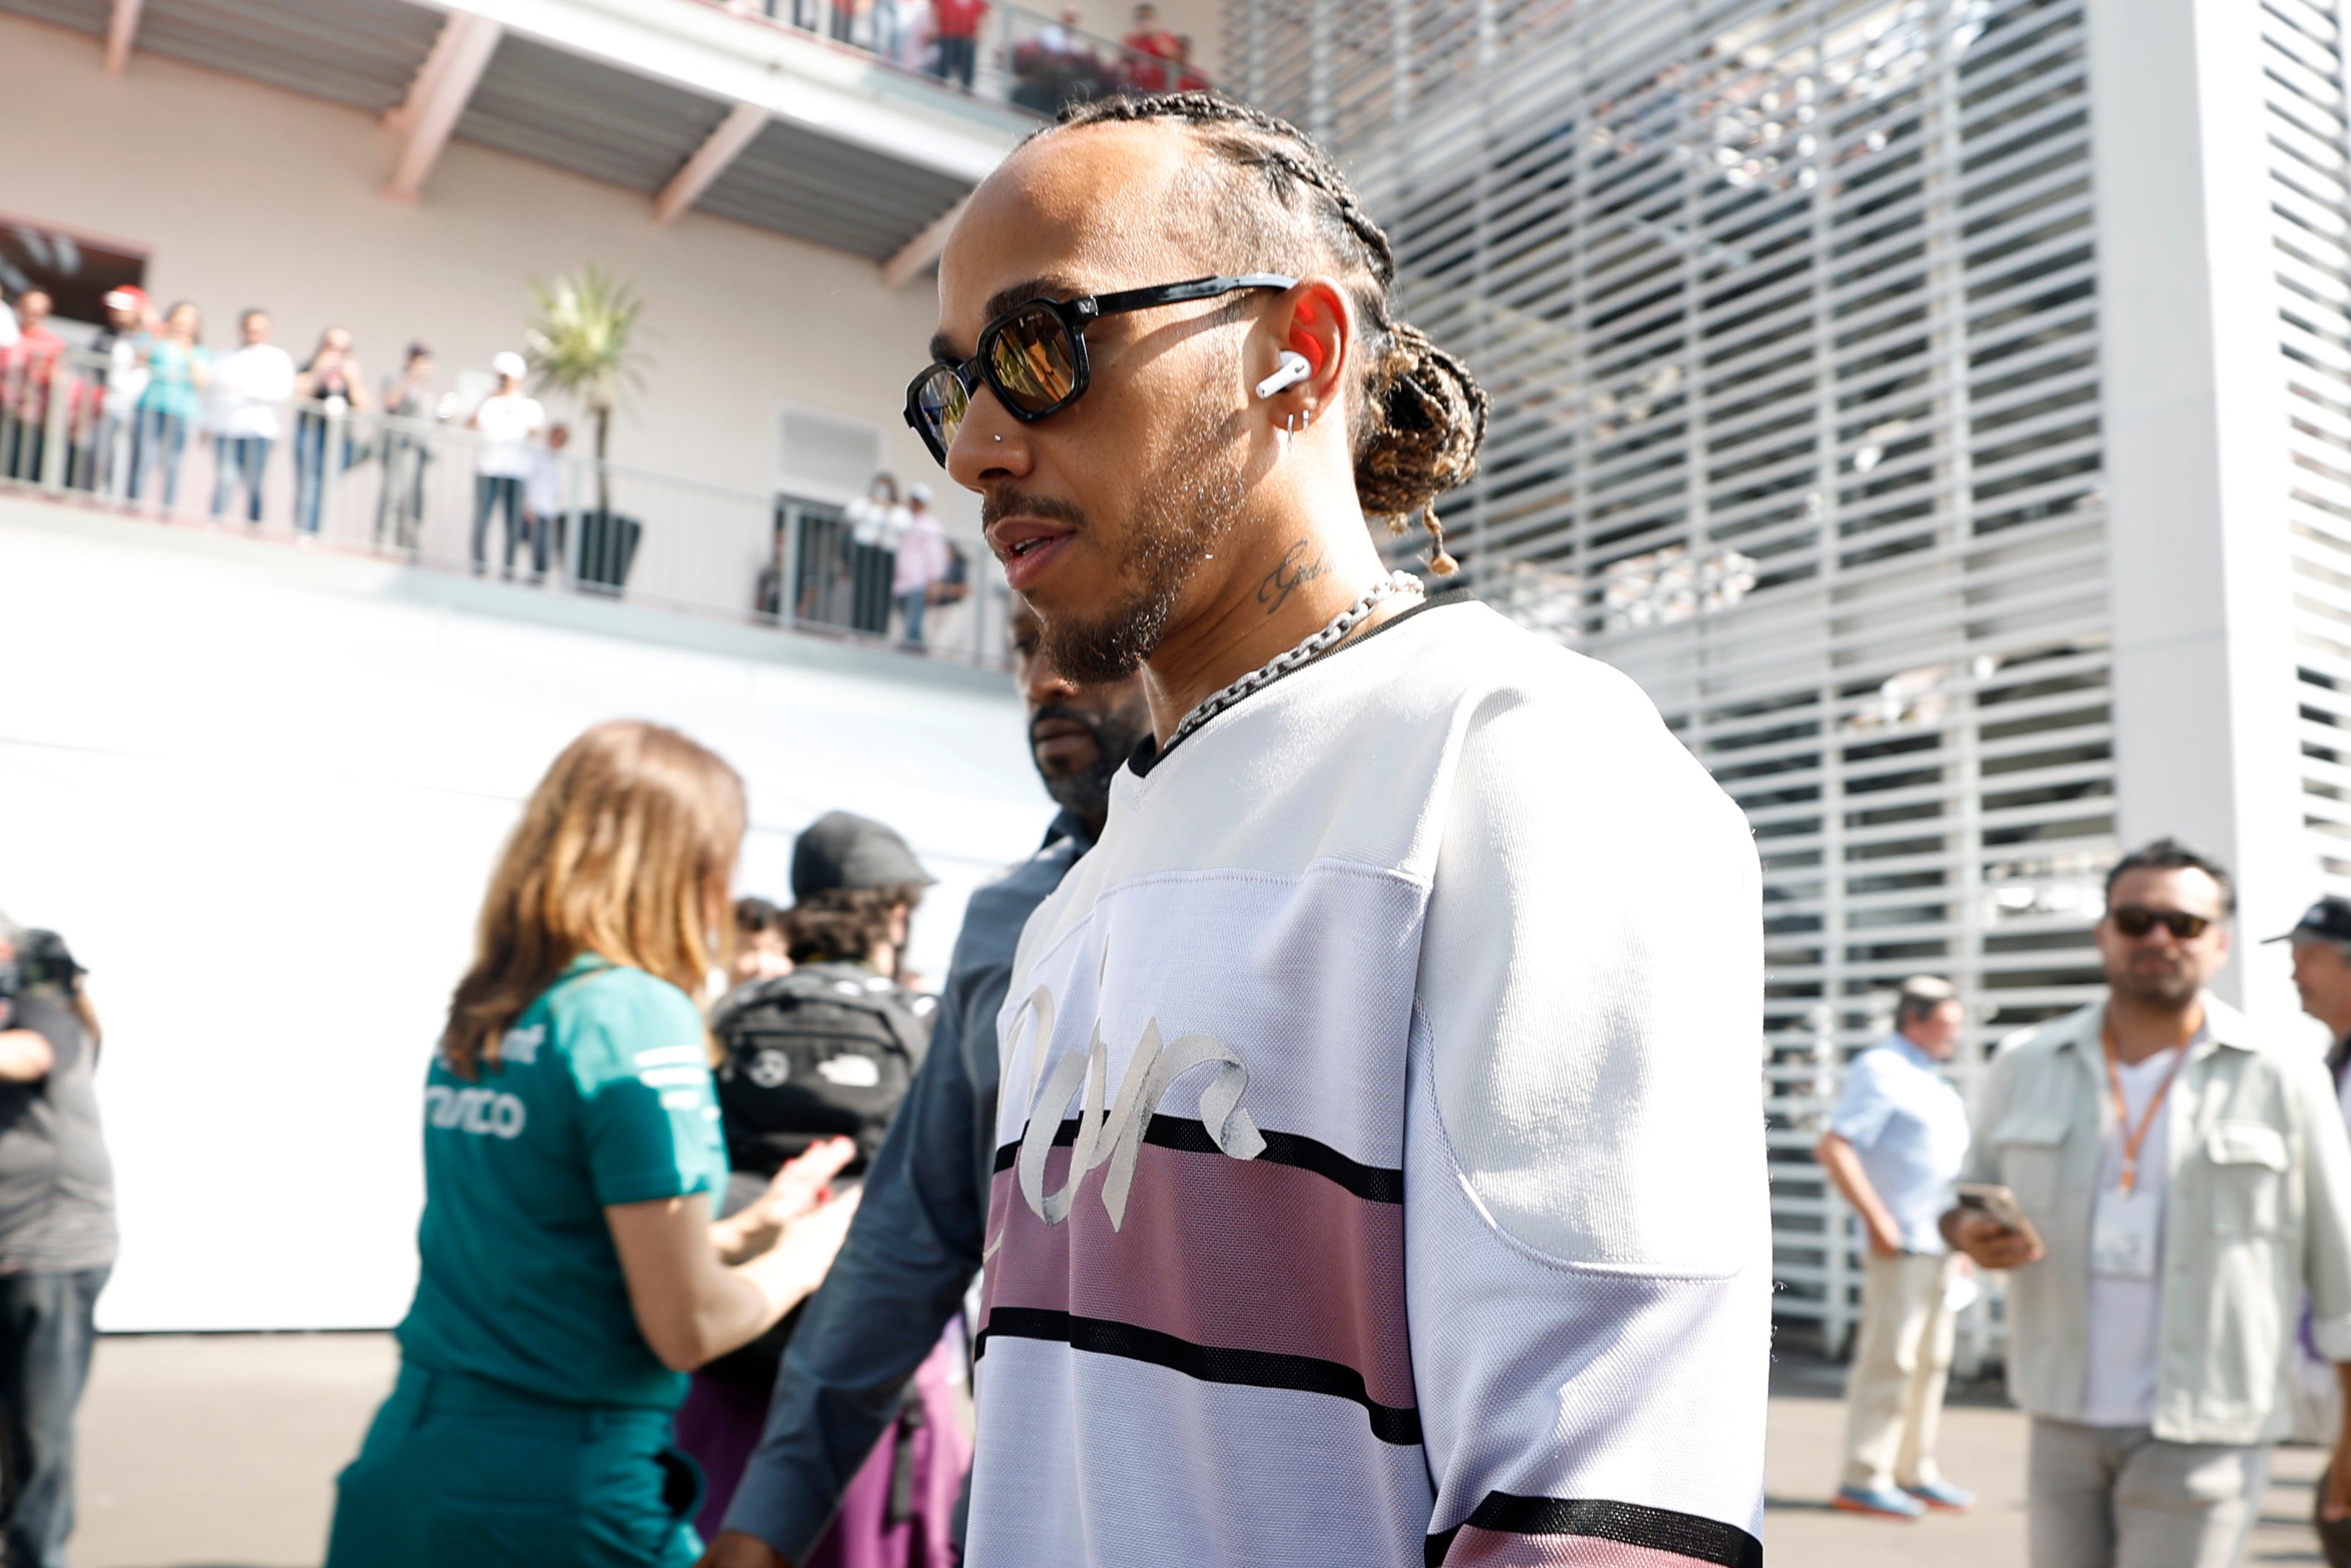 Lewis Hamilton has joined forces with Tiger Woods and Serena Williams for a new sports tech venture